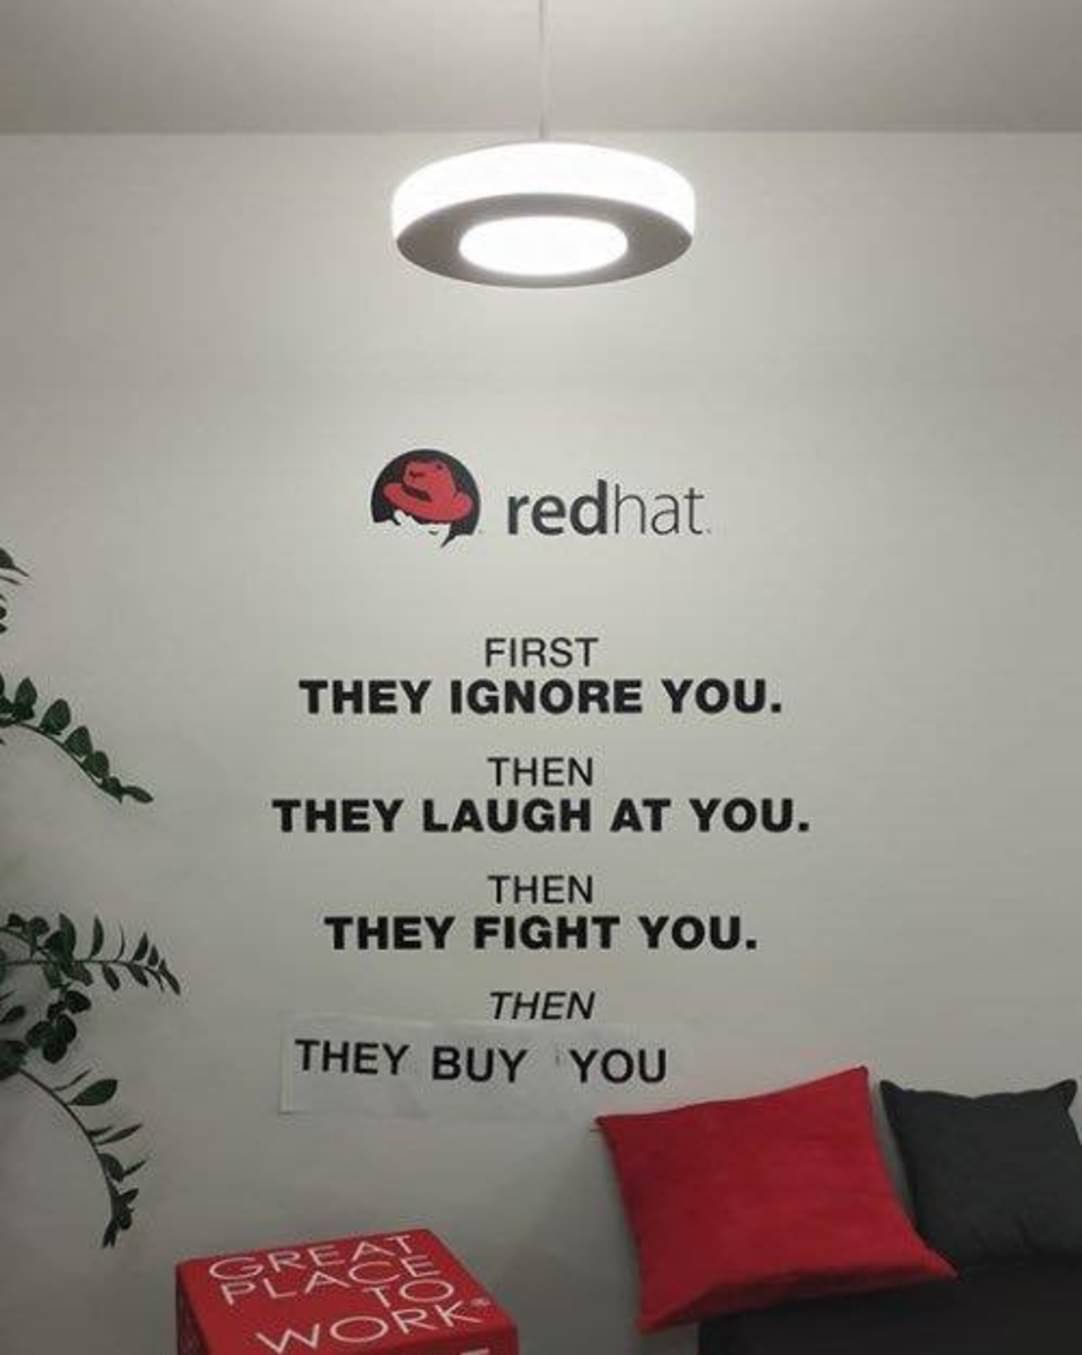 redhat_then_they_buy_you.jpg